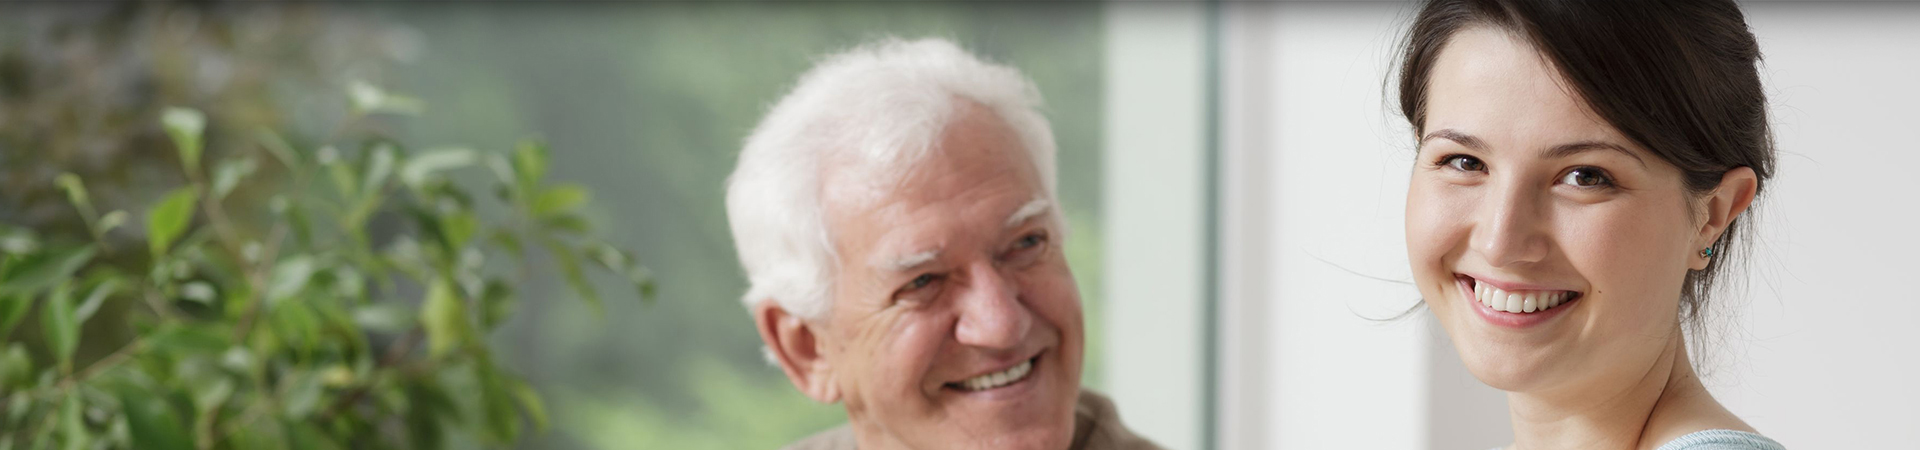 A man with white hair smiling for the camera.